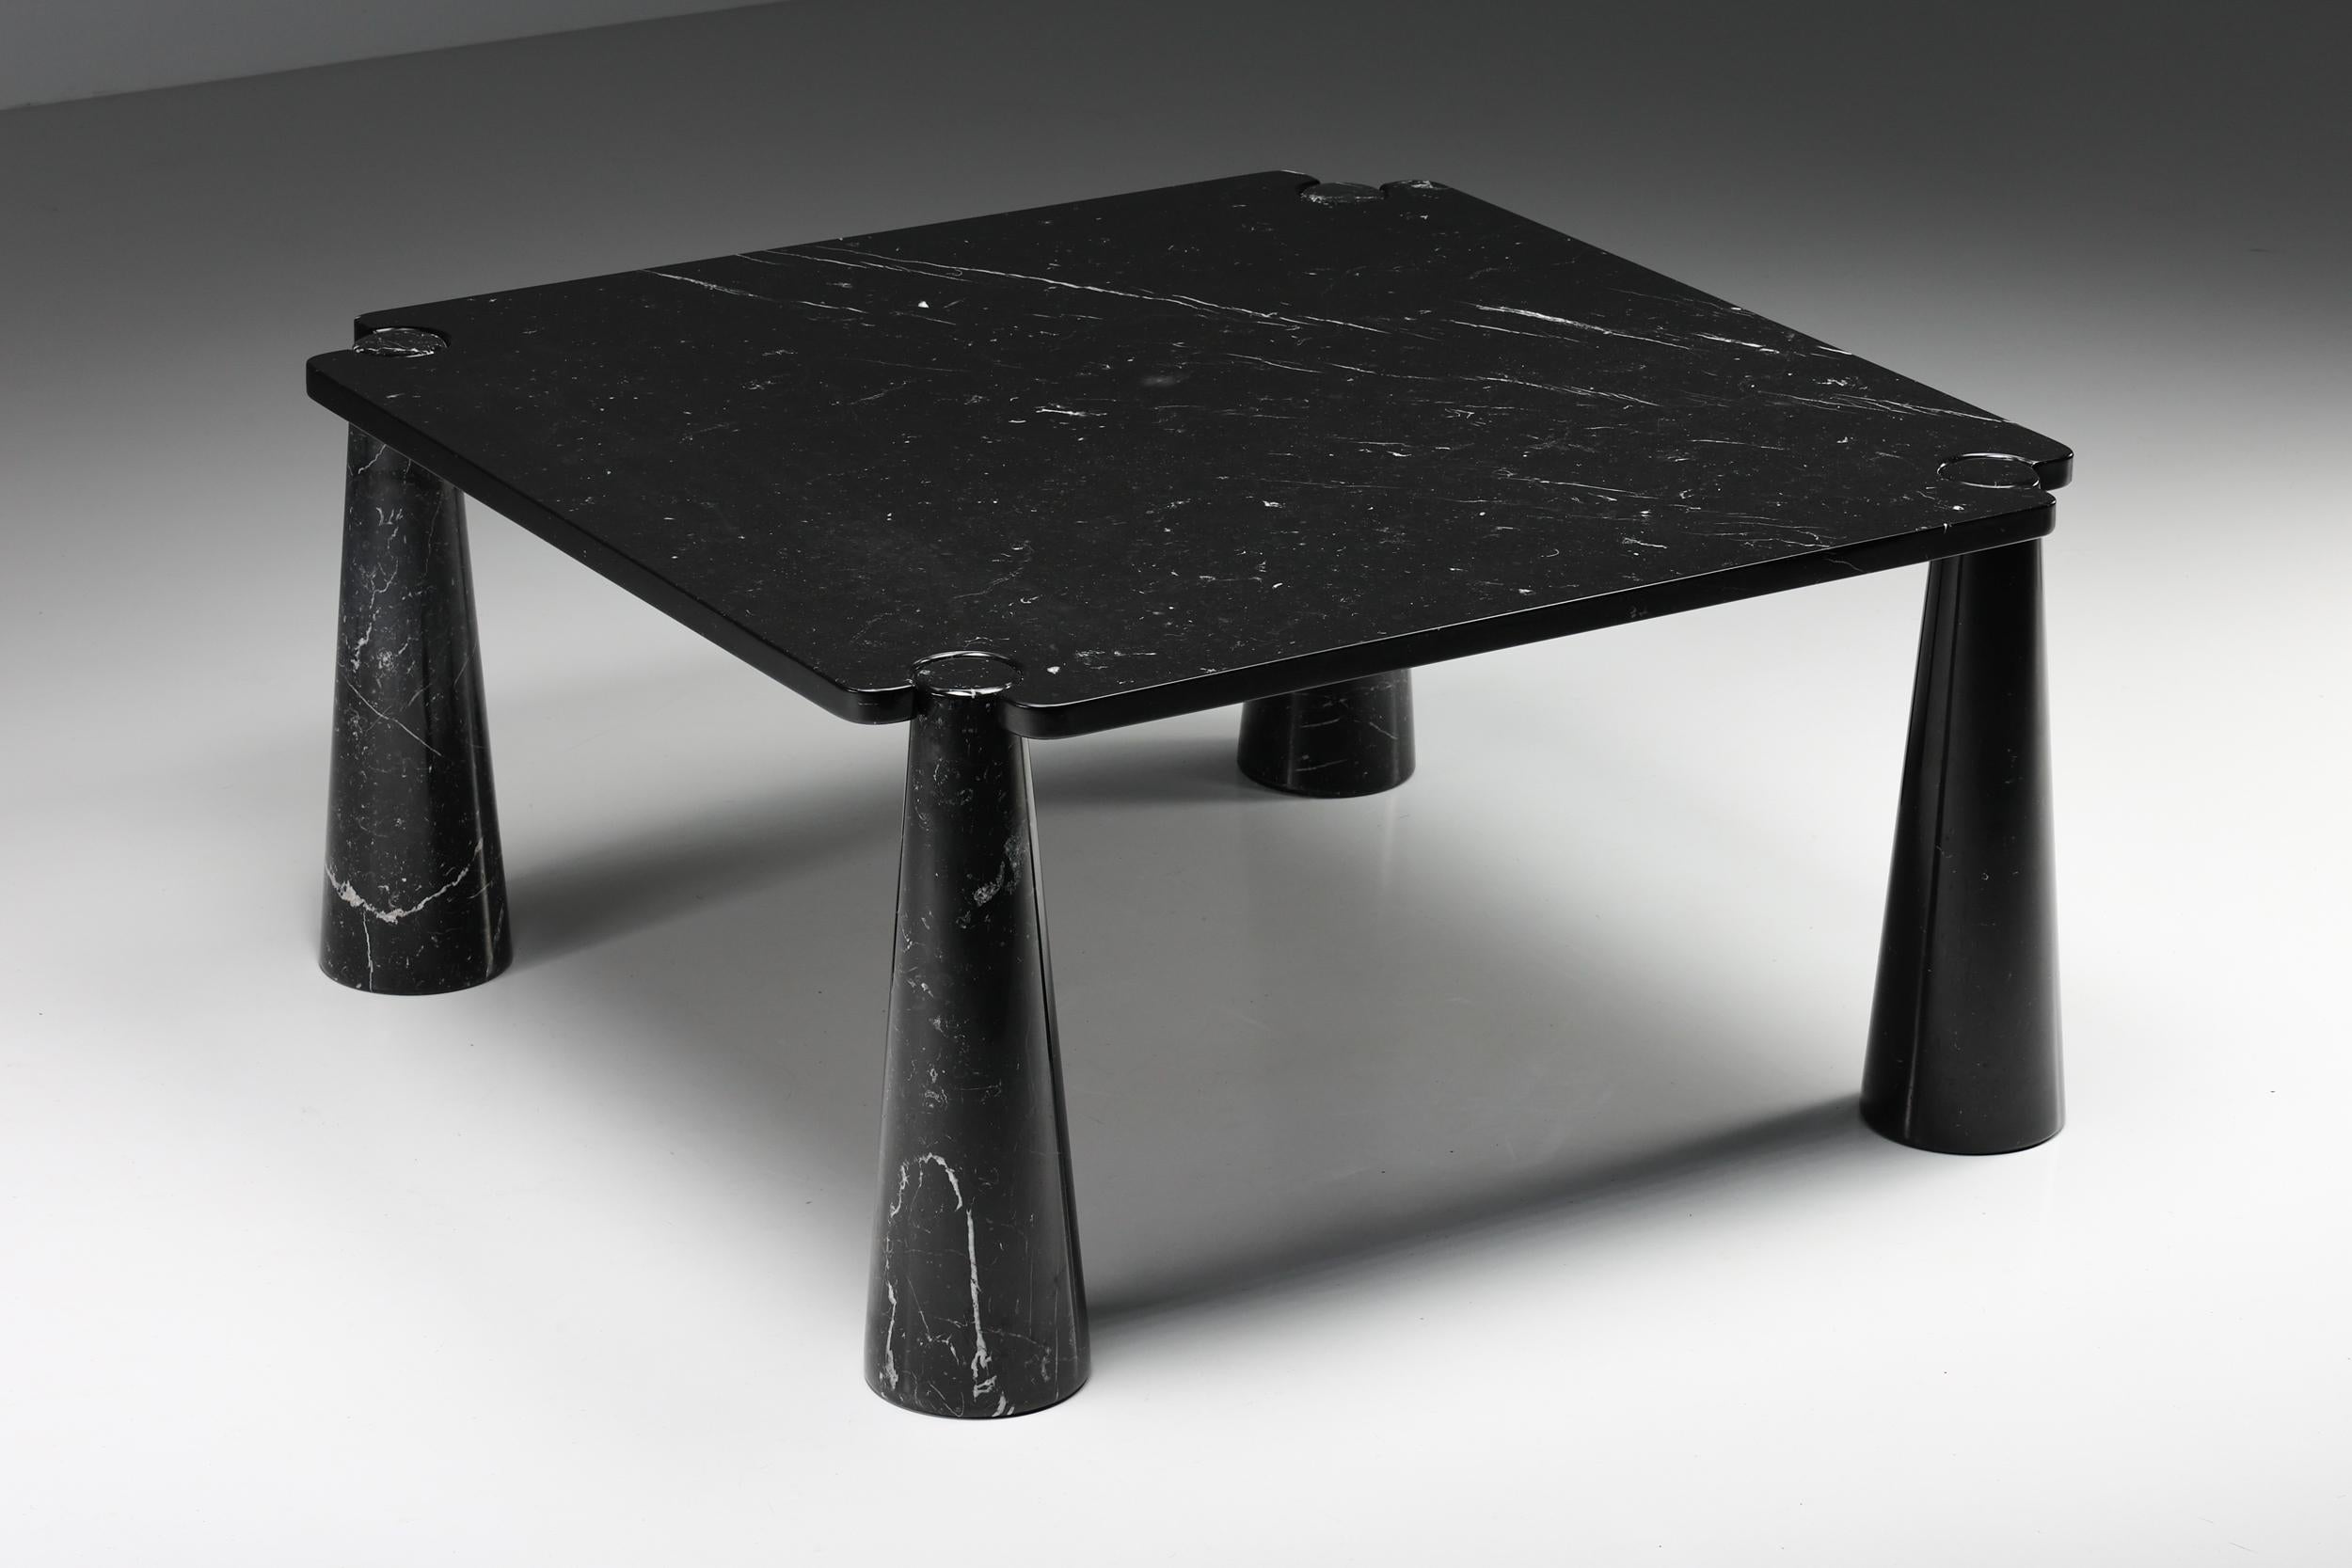 Italian Mangiarotti 'Eros' Square Marble Dining Table, Italy, Post-Modern, 1970's For Sale